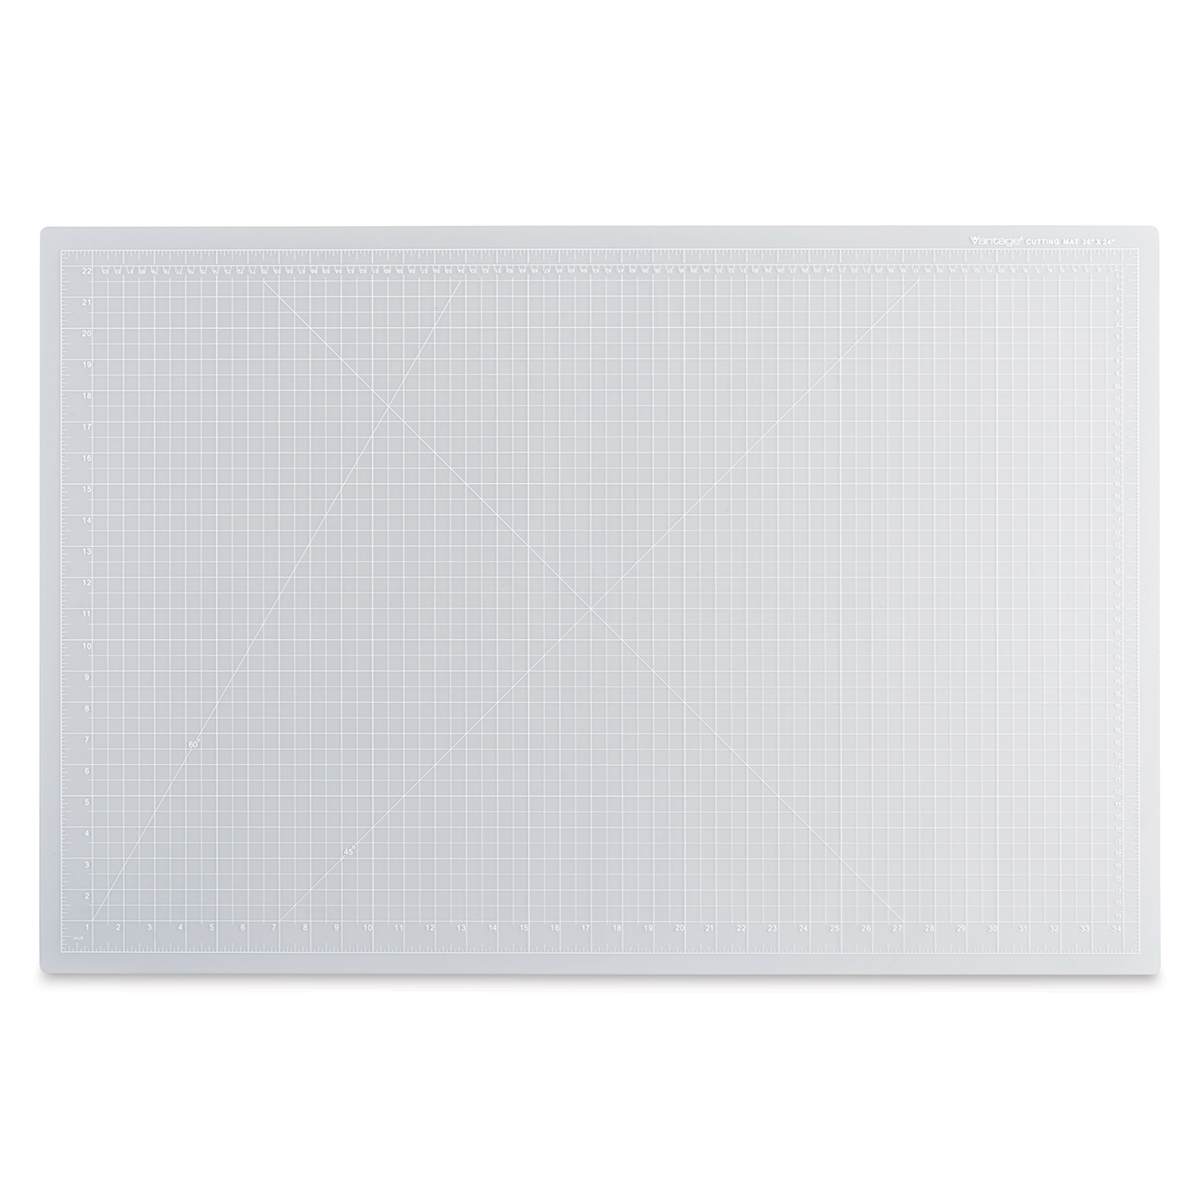 Dahle Vantage 10680 Self-Healing Cutting Mat, 9By12 Inch, 1/2 Grid,  Perfect for Crafts & Sewing, Clear 